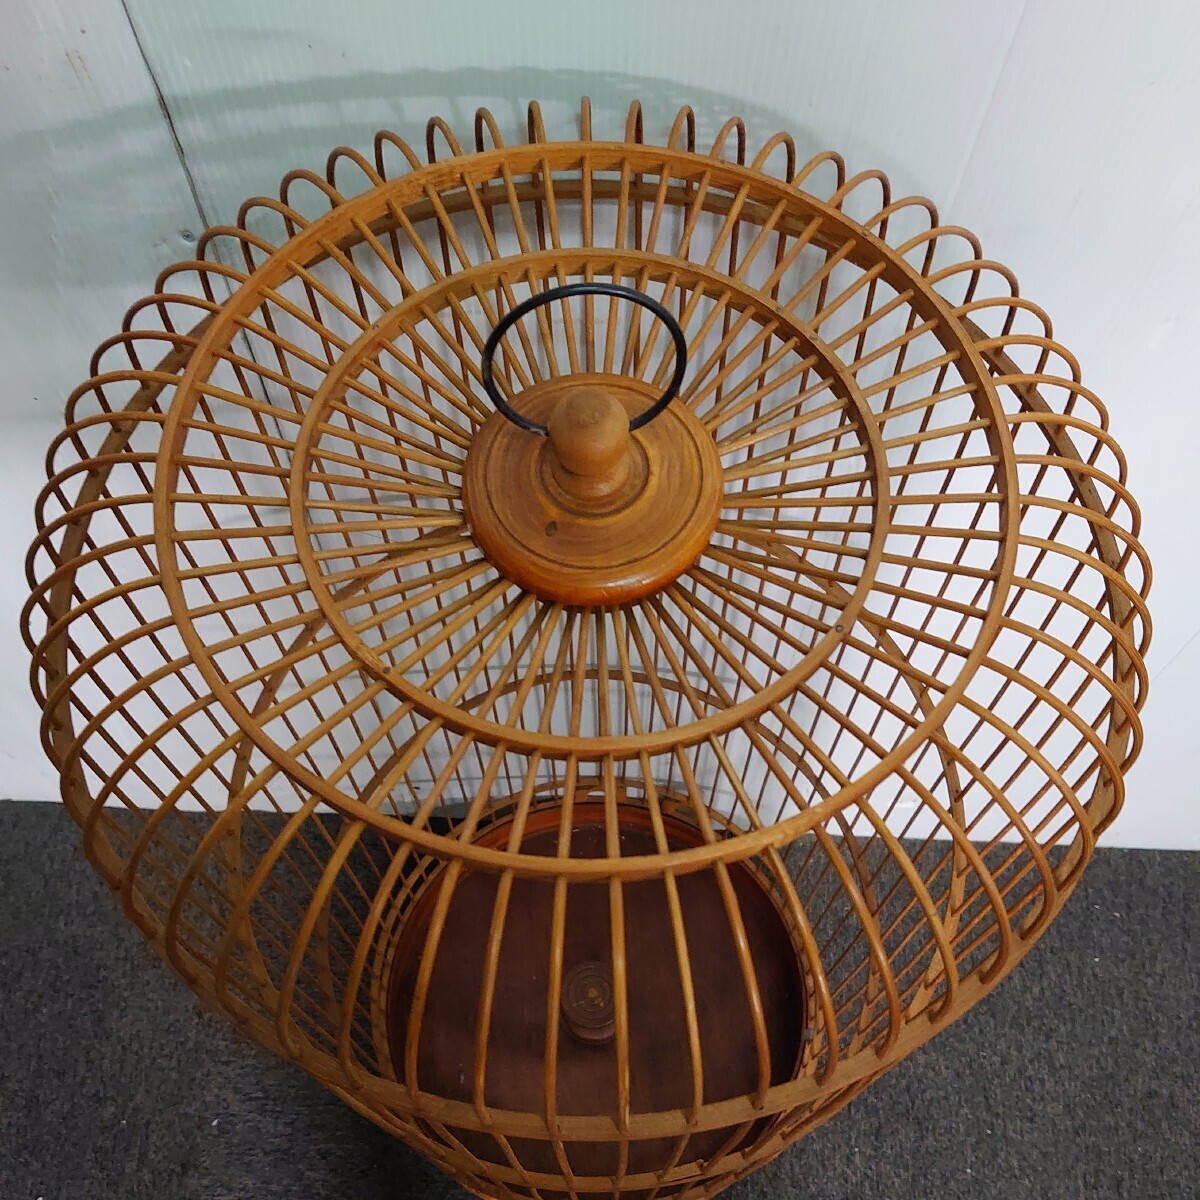  bird cage height 90cm× width 40cm bamboo skill cage bird . bamboo made pet cage antique cheap selling out start k